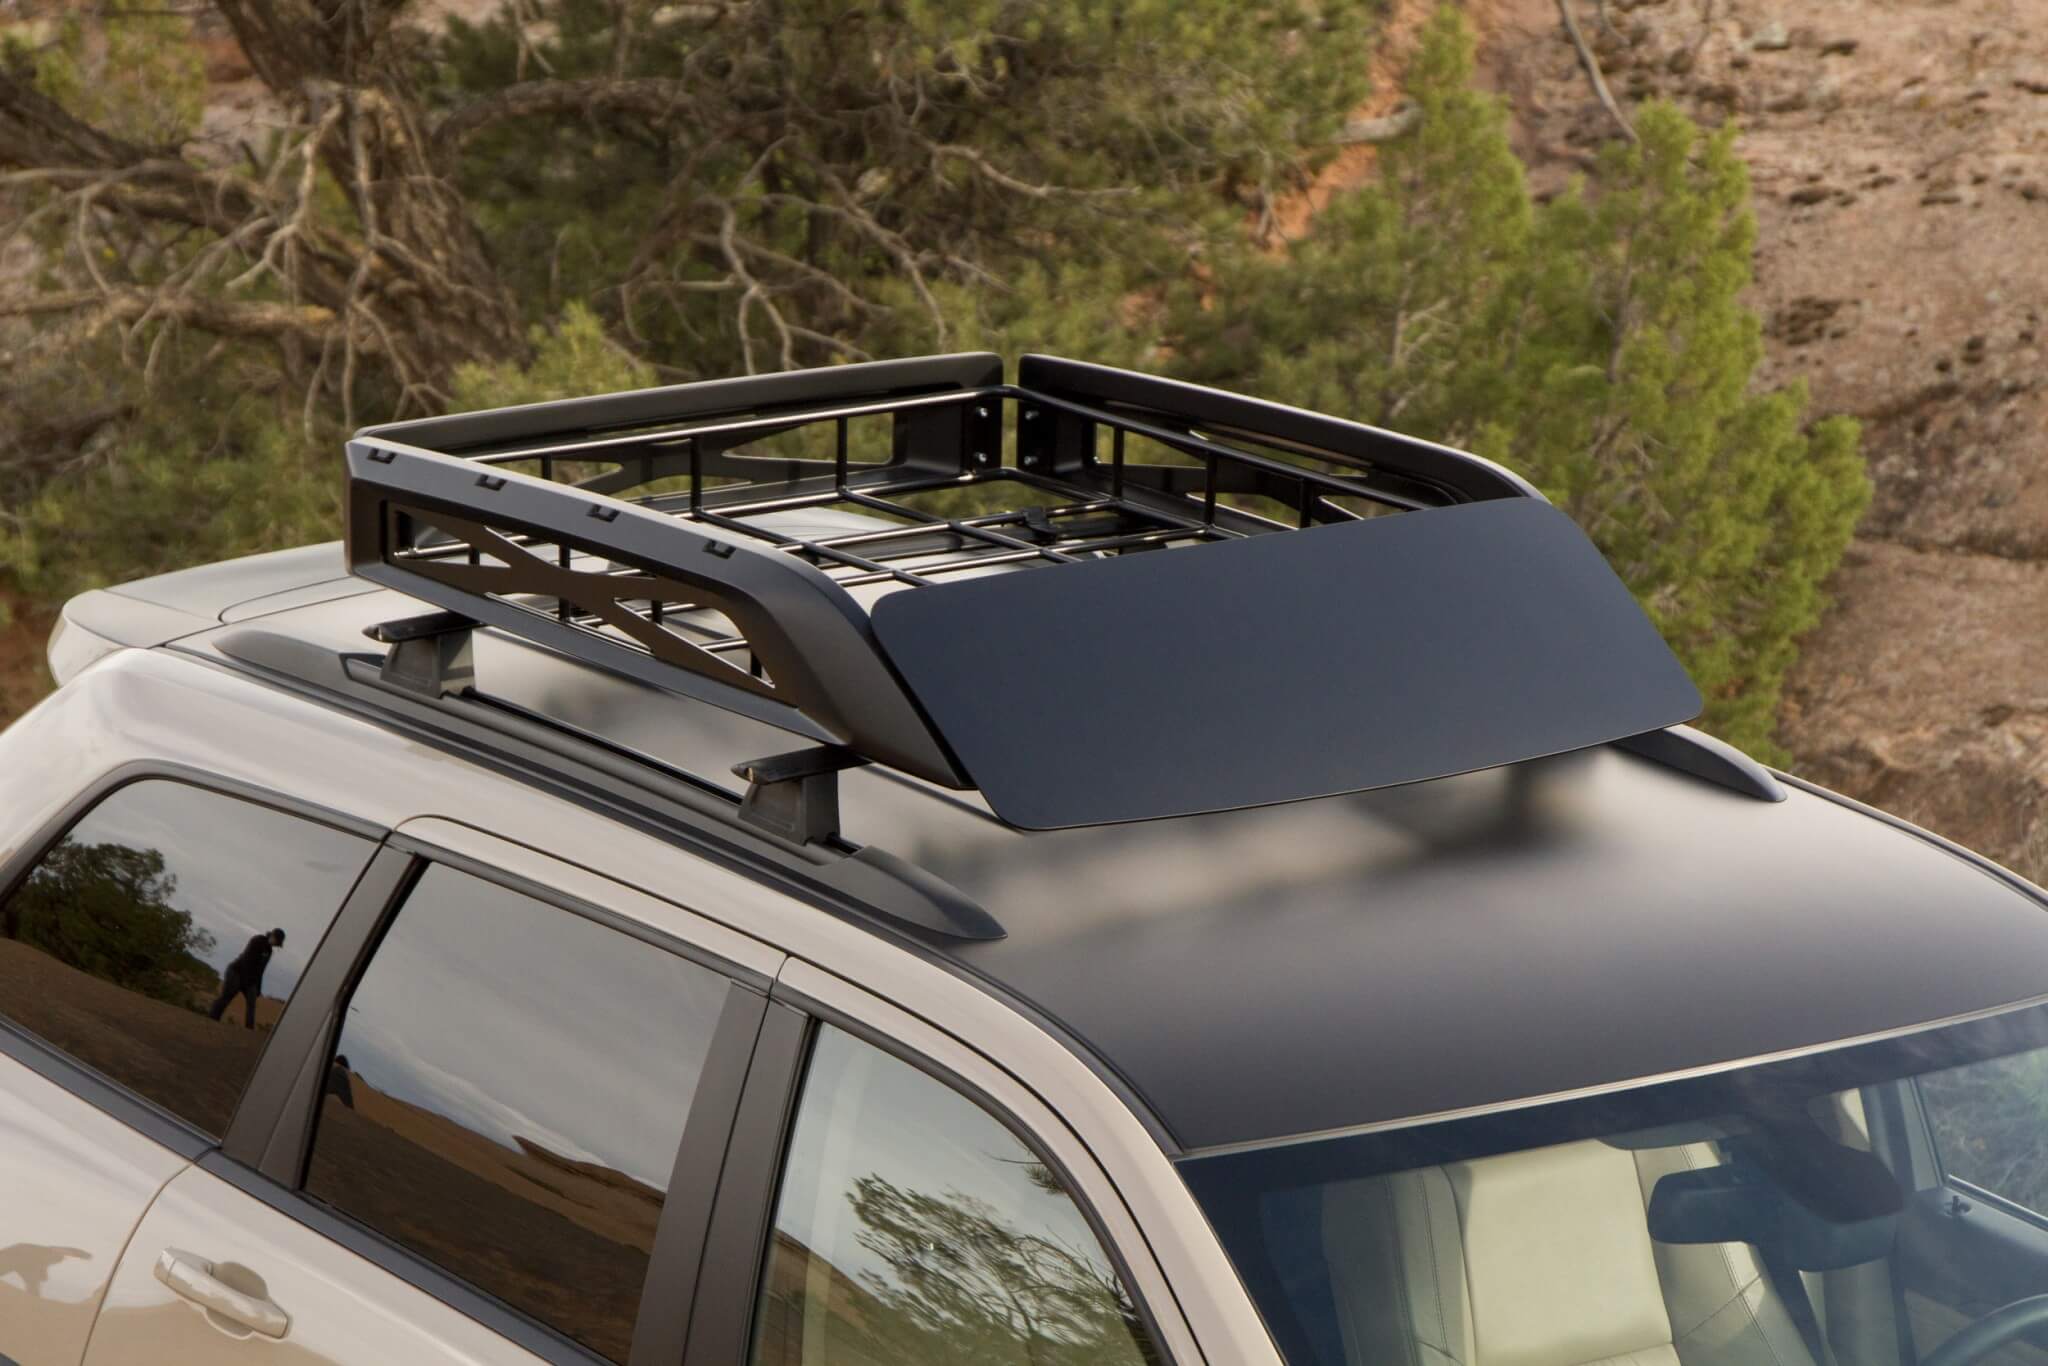 We particularly like the prototype roof rack for the Grand Cherokee. This unit looks cool and will allow you to carry extra trail gear on the outside so you can take a trip with the seats full of adventurous friends and family members. 